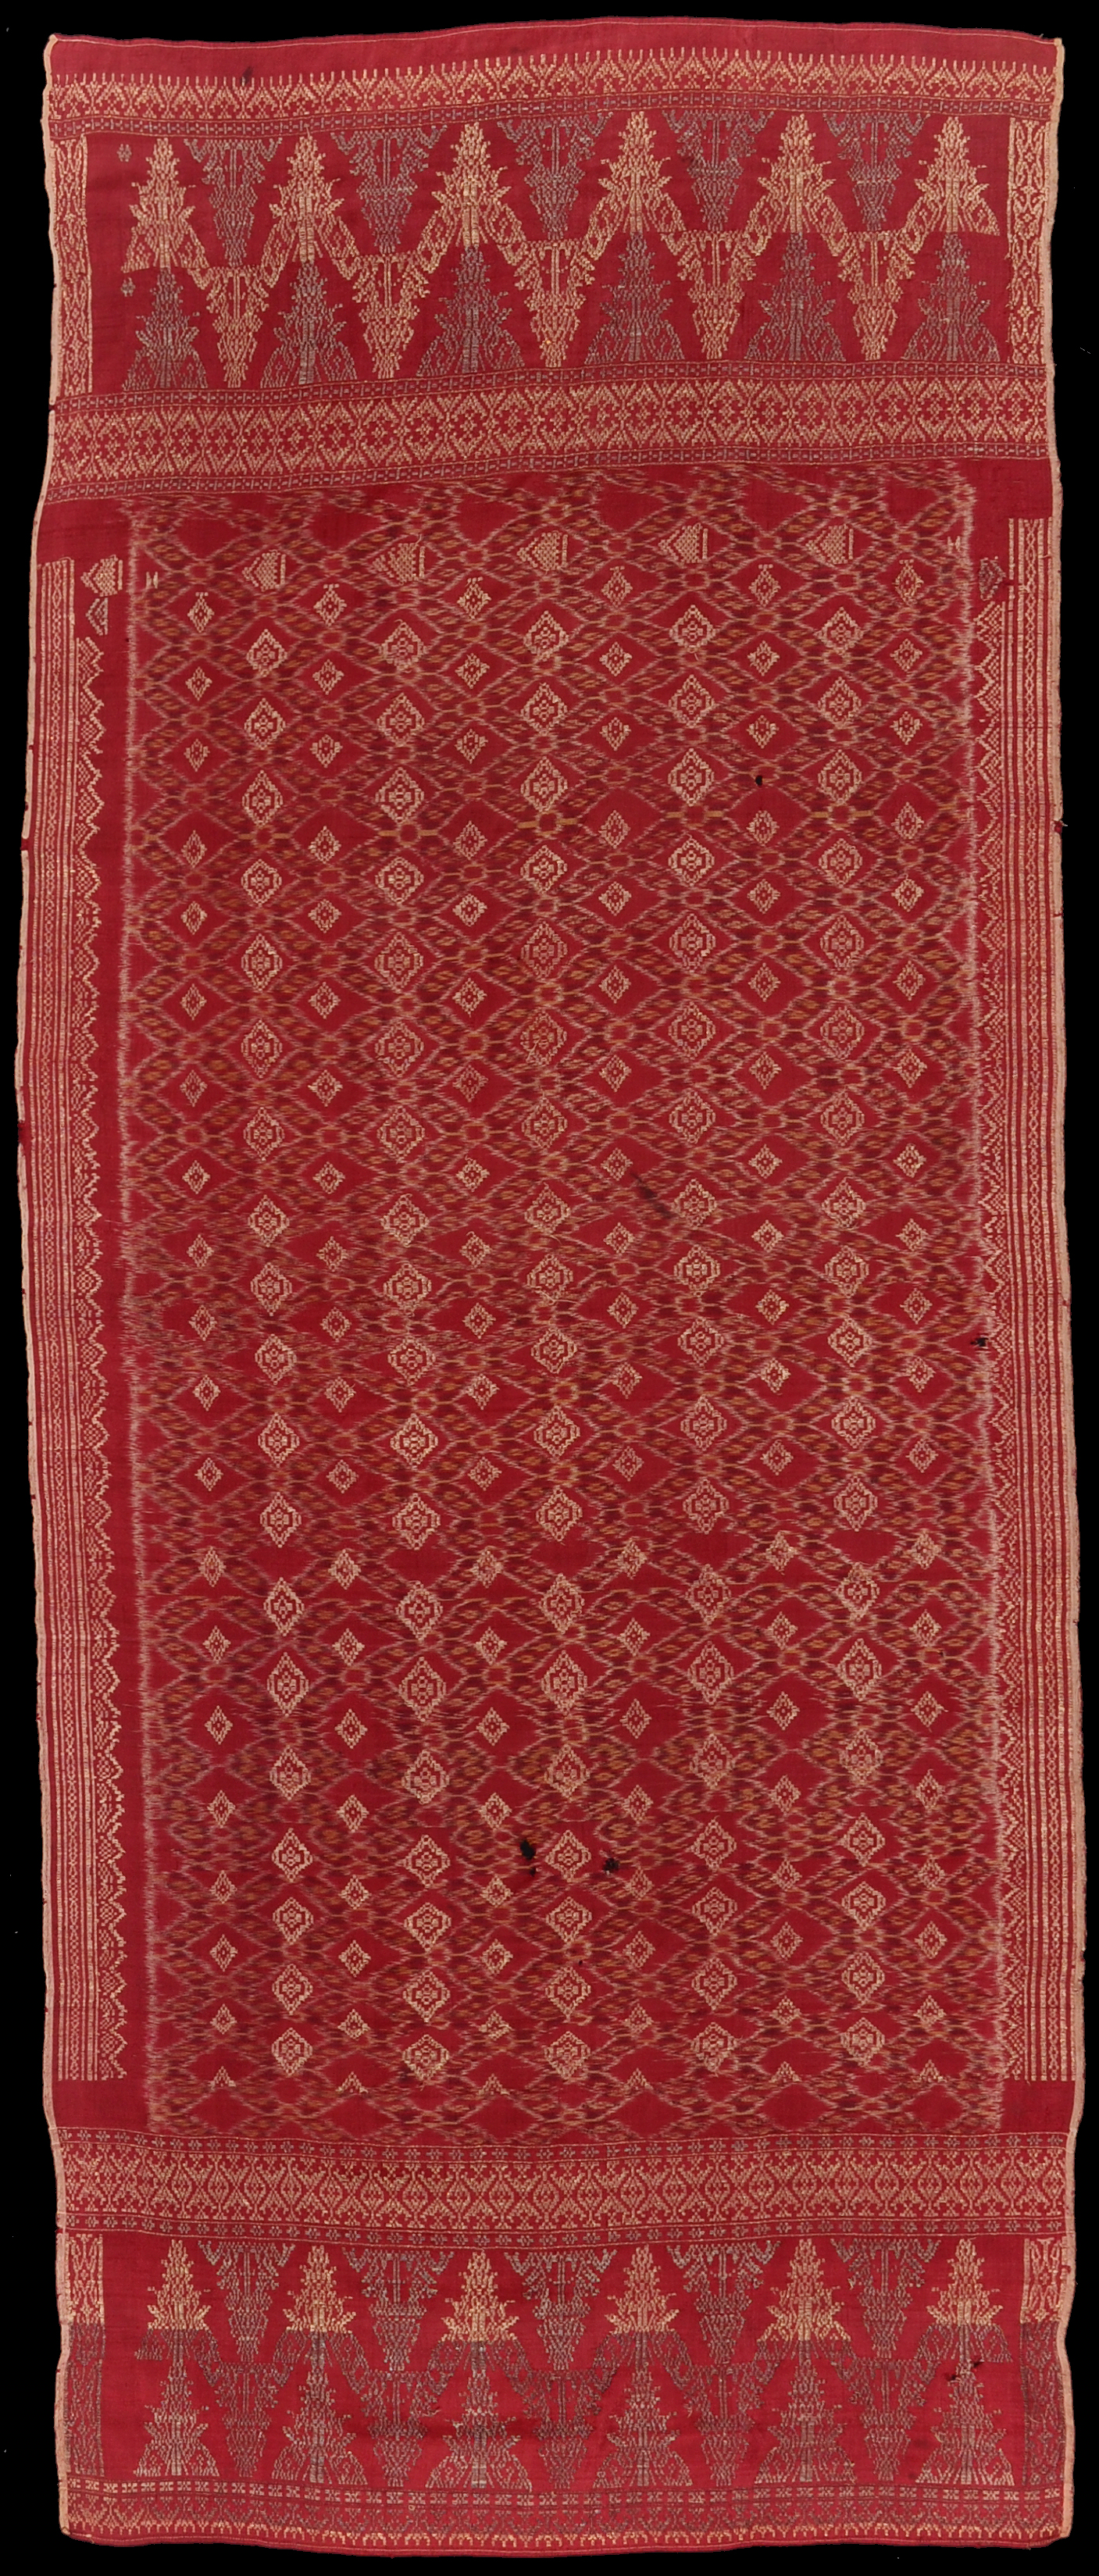 Ikat from Bali, Bali Group, Indonesia